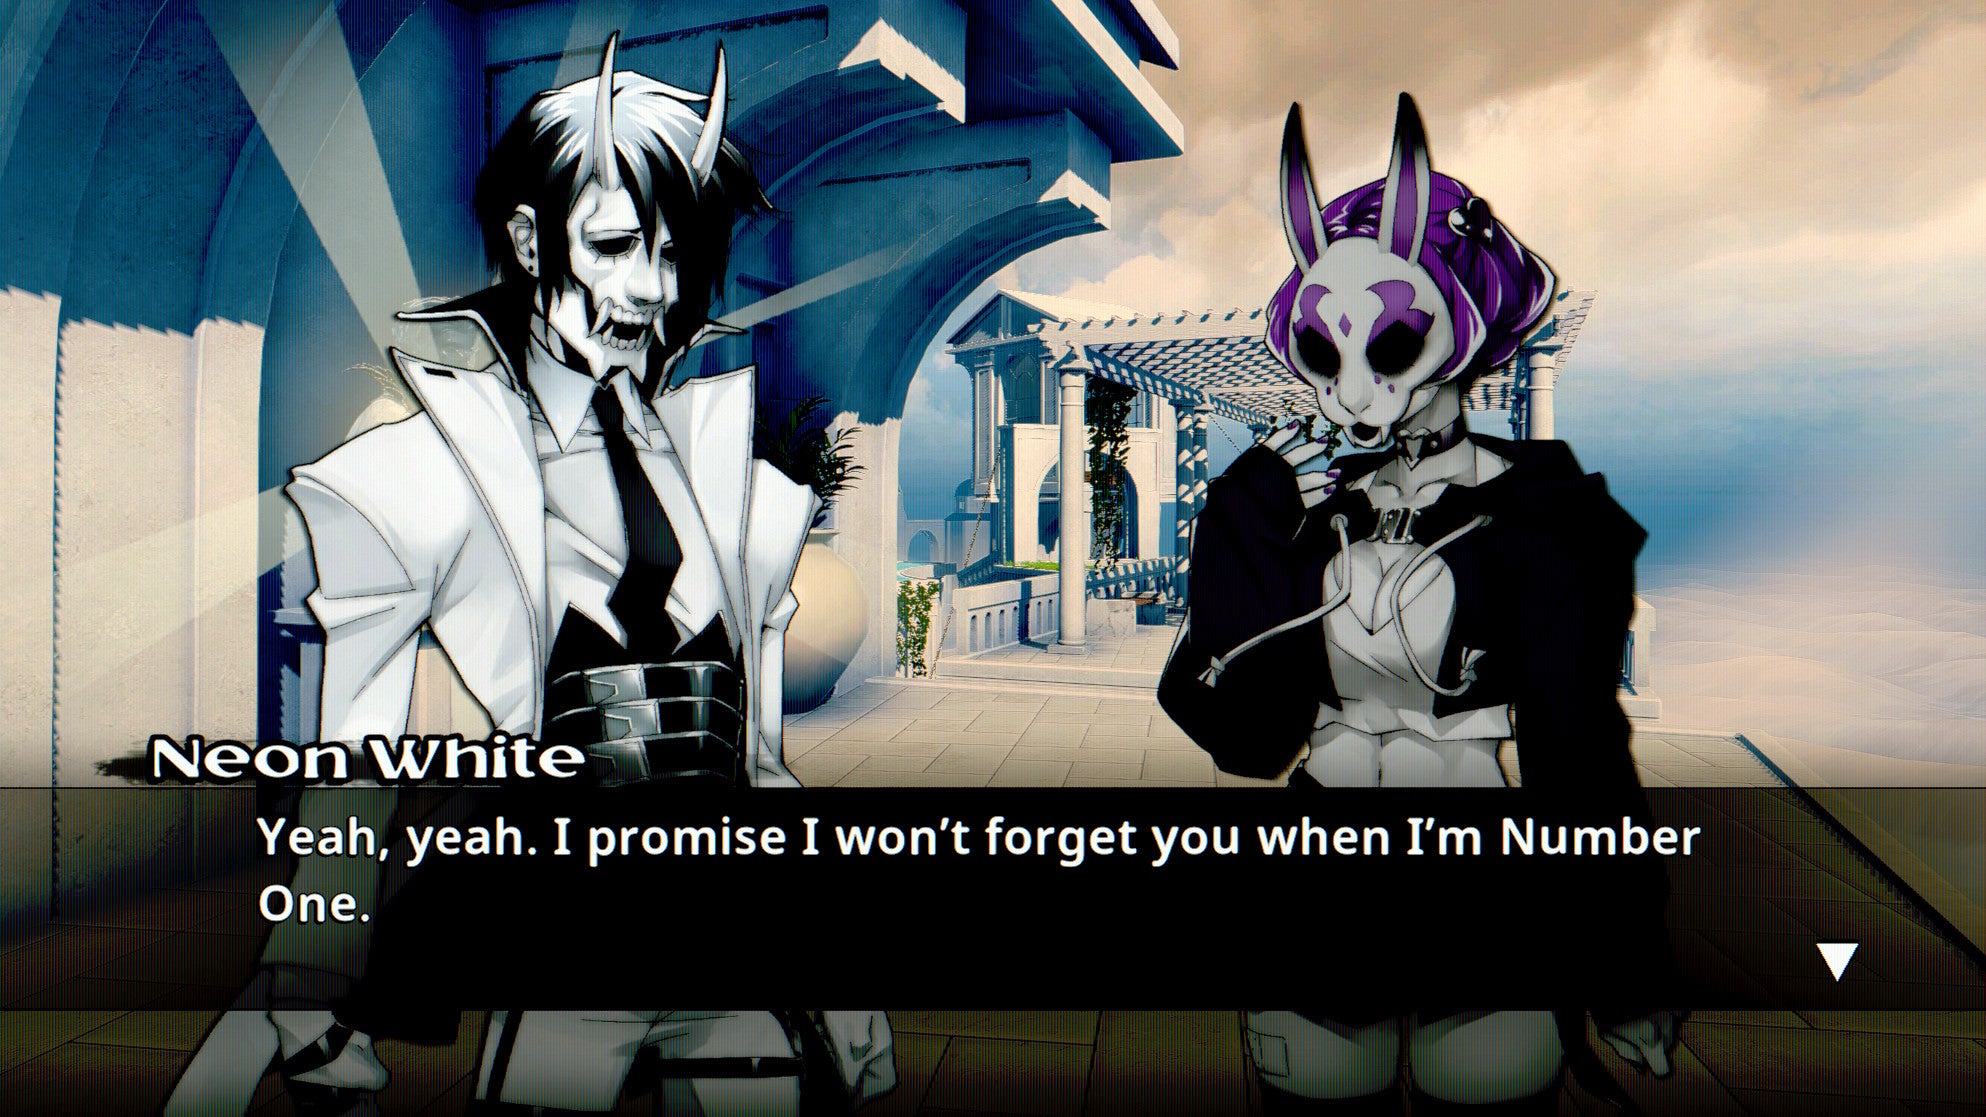 Neon White and Neon Violet, two demon assassins in strange masks, have a chat in heaven in a Neon White screenshot.